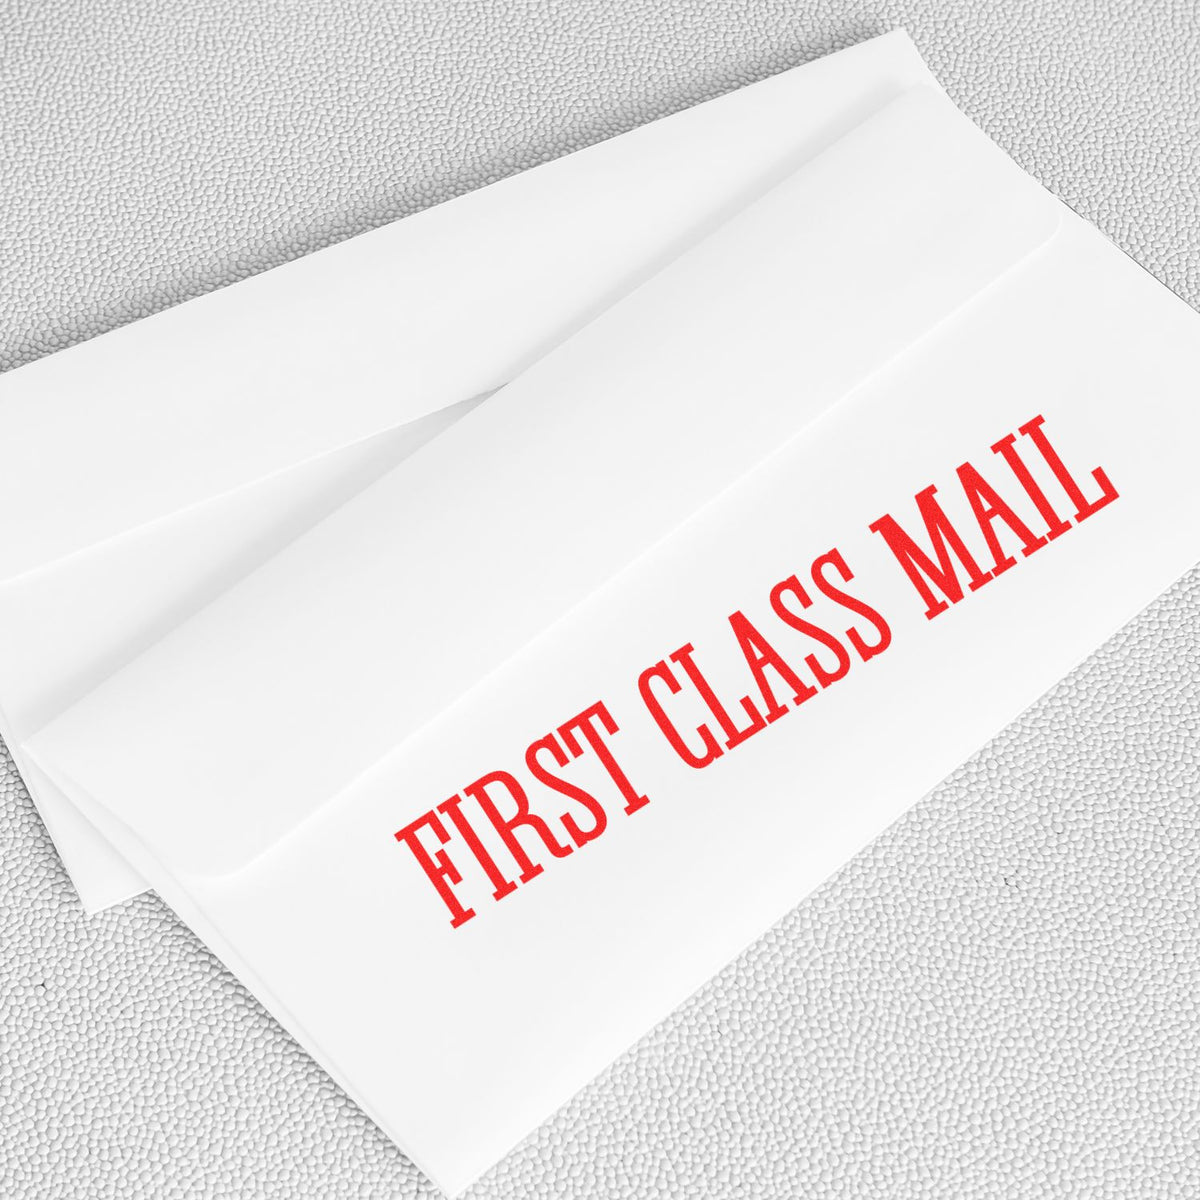 Self-Inking Times First Class Mail Stamp In Use Photo